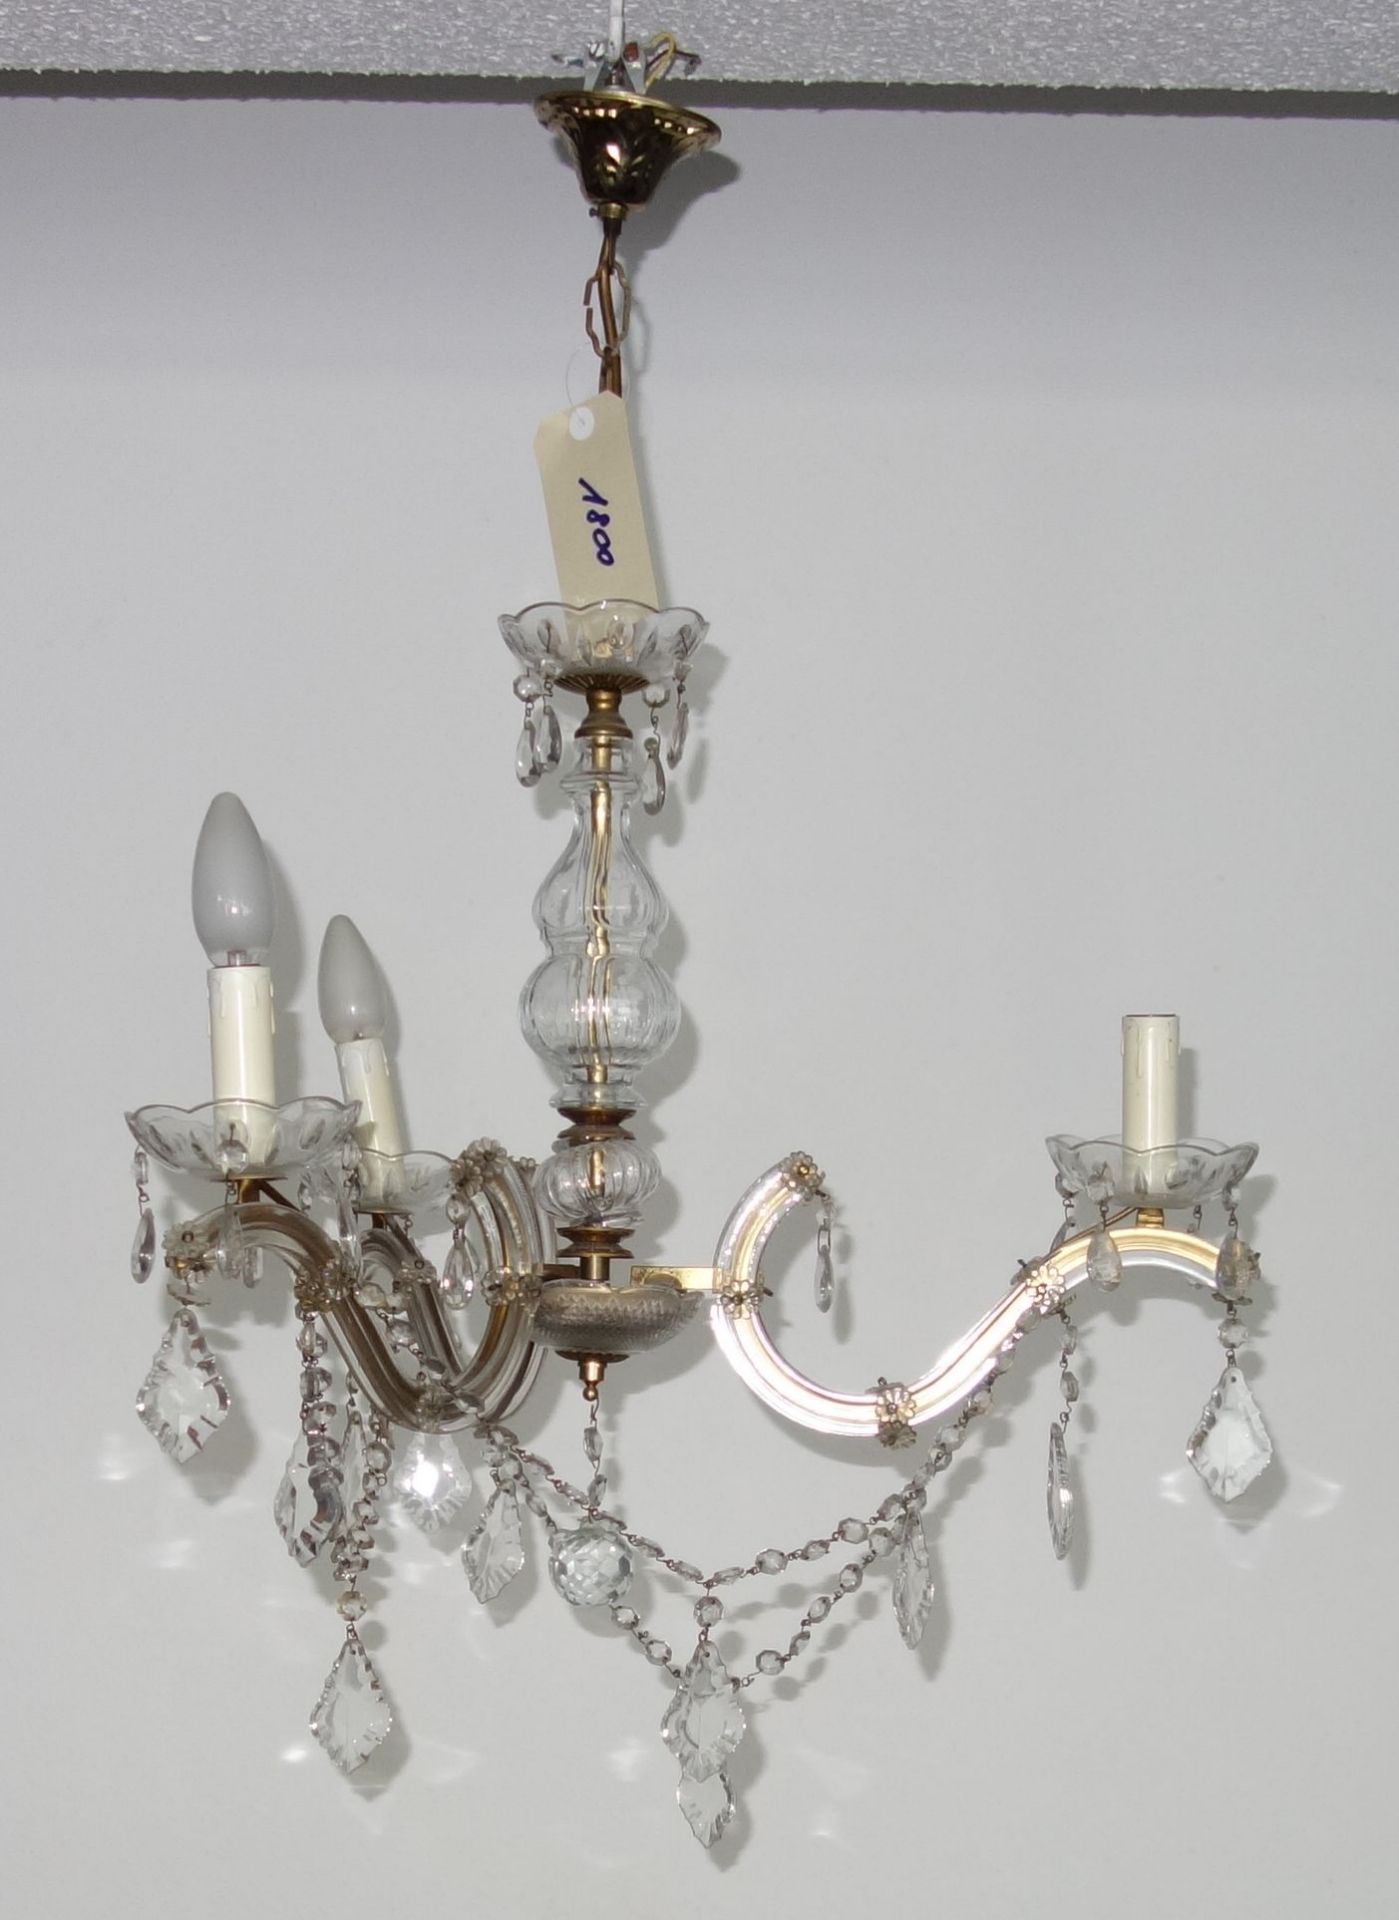 MARIA-THERESIA-CHANDELIER - Image 2 of 3